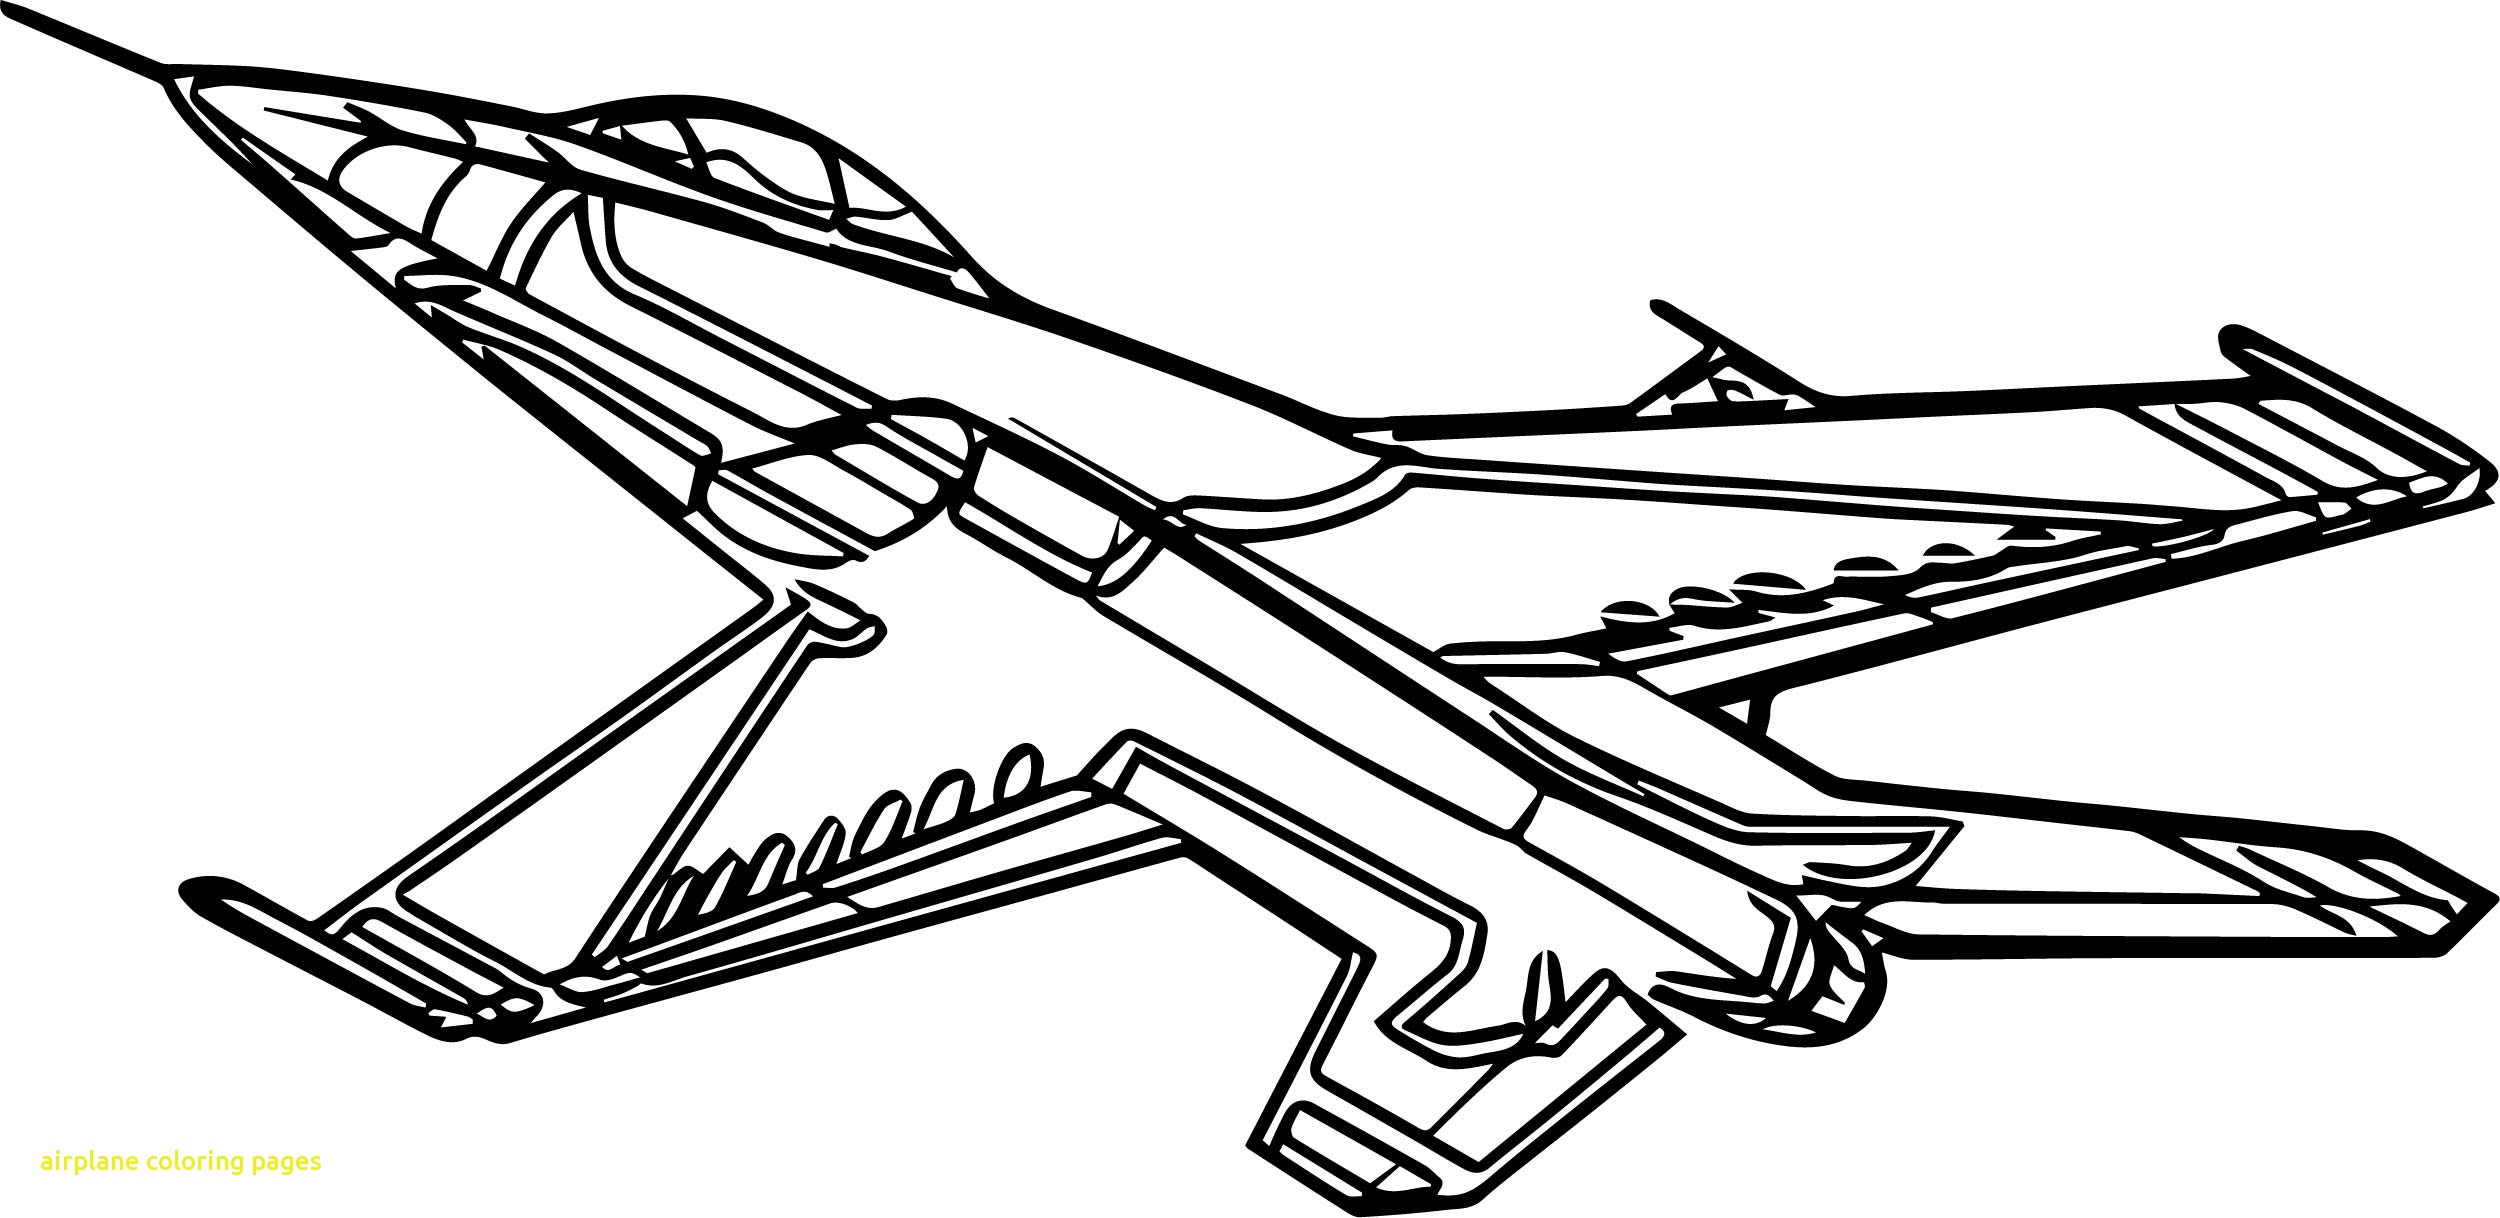 draco airplane coloring page